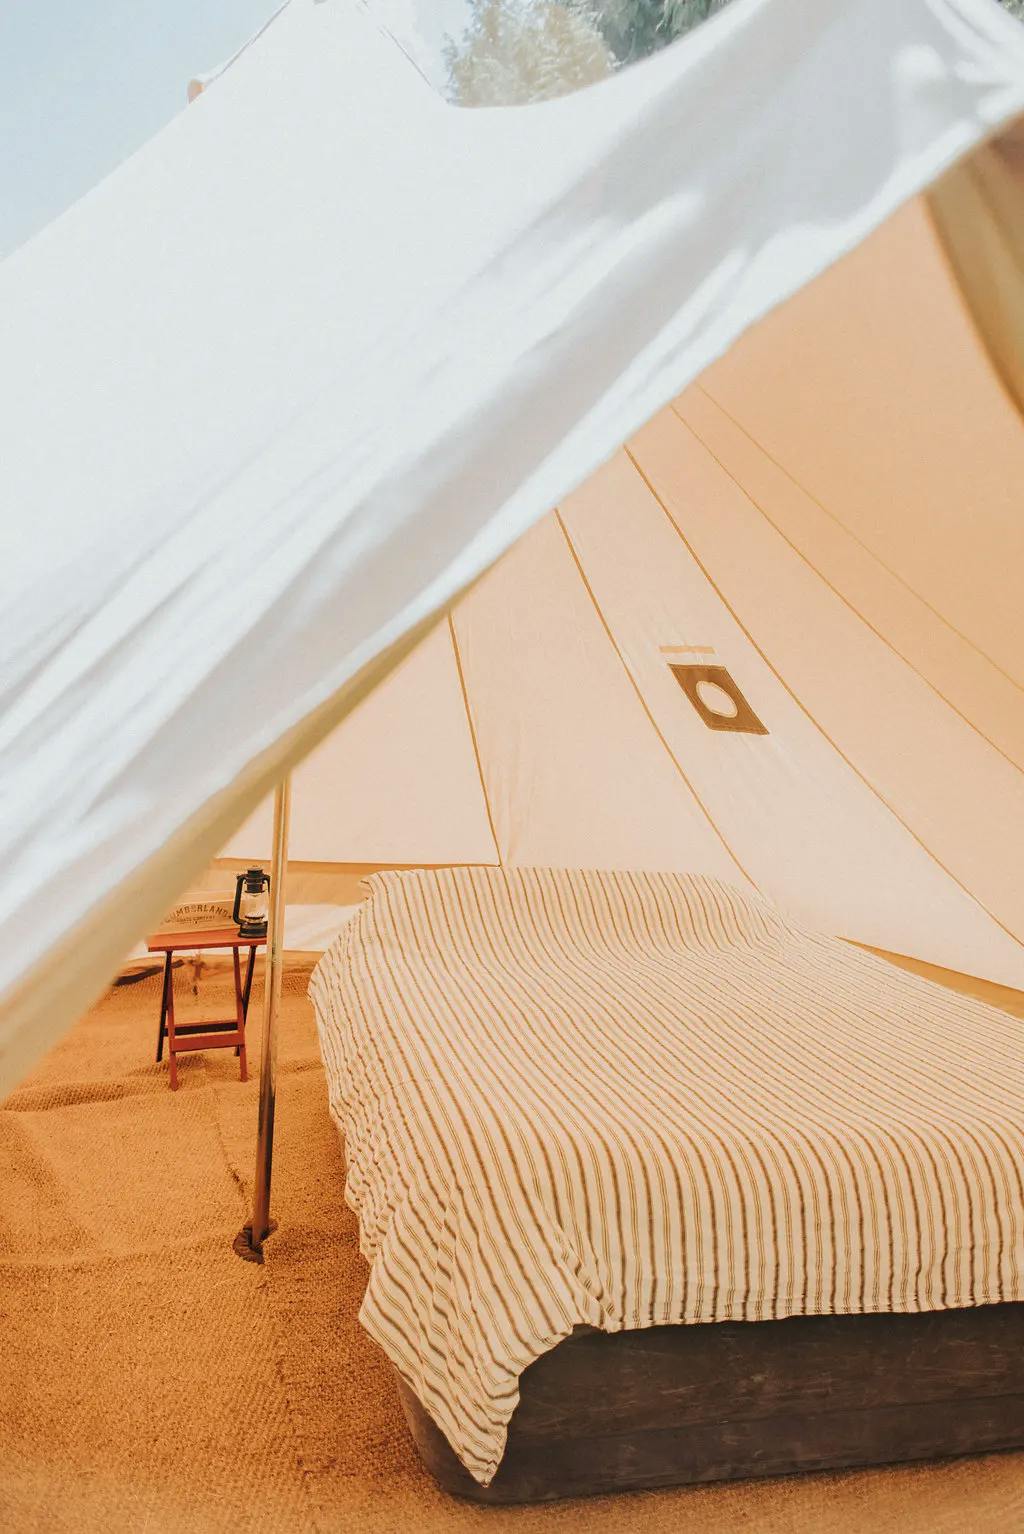 Cozy tent interior with a large bed and striped cover.